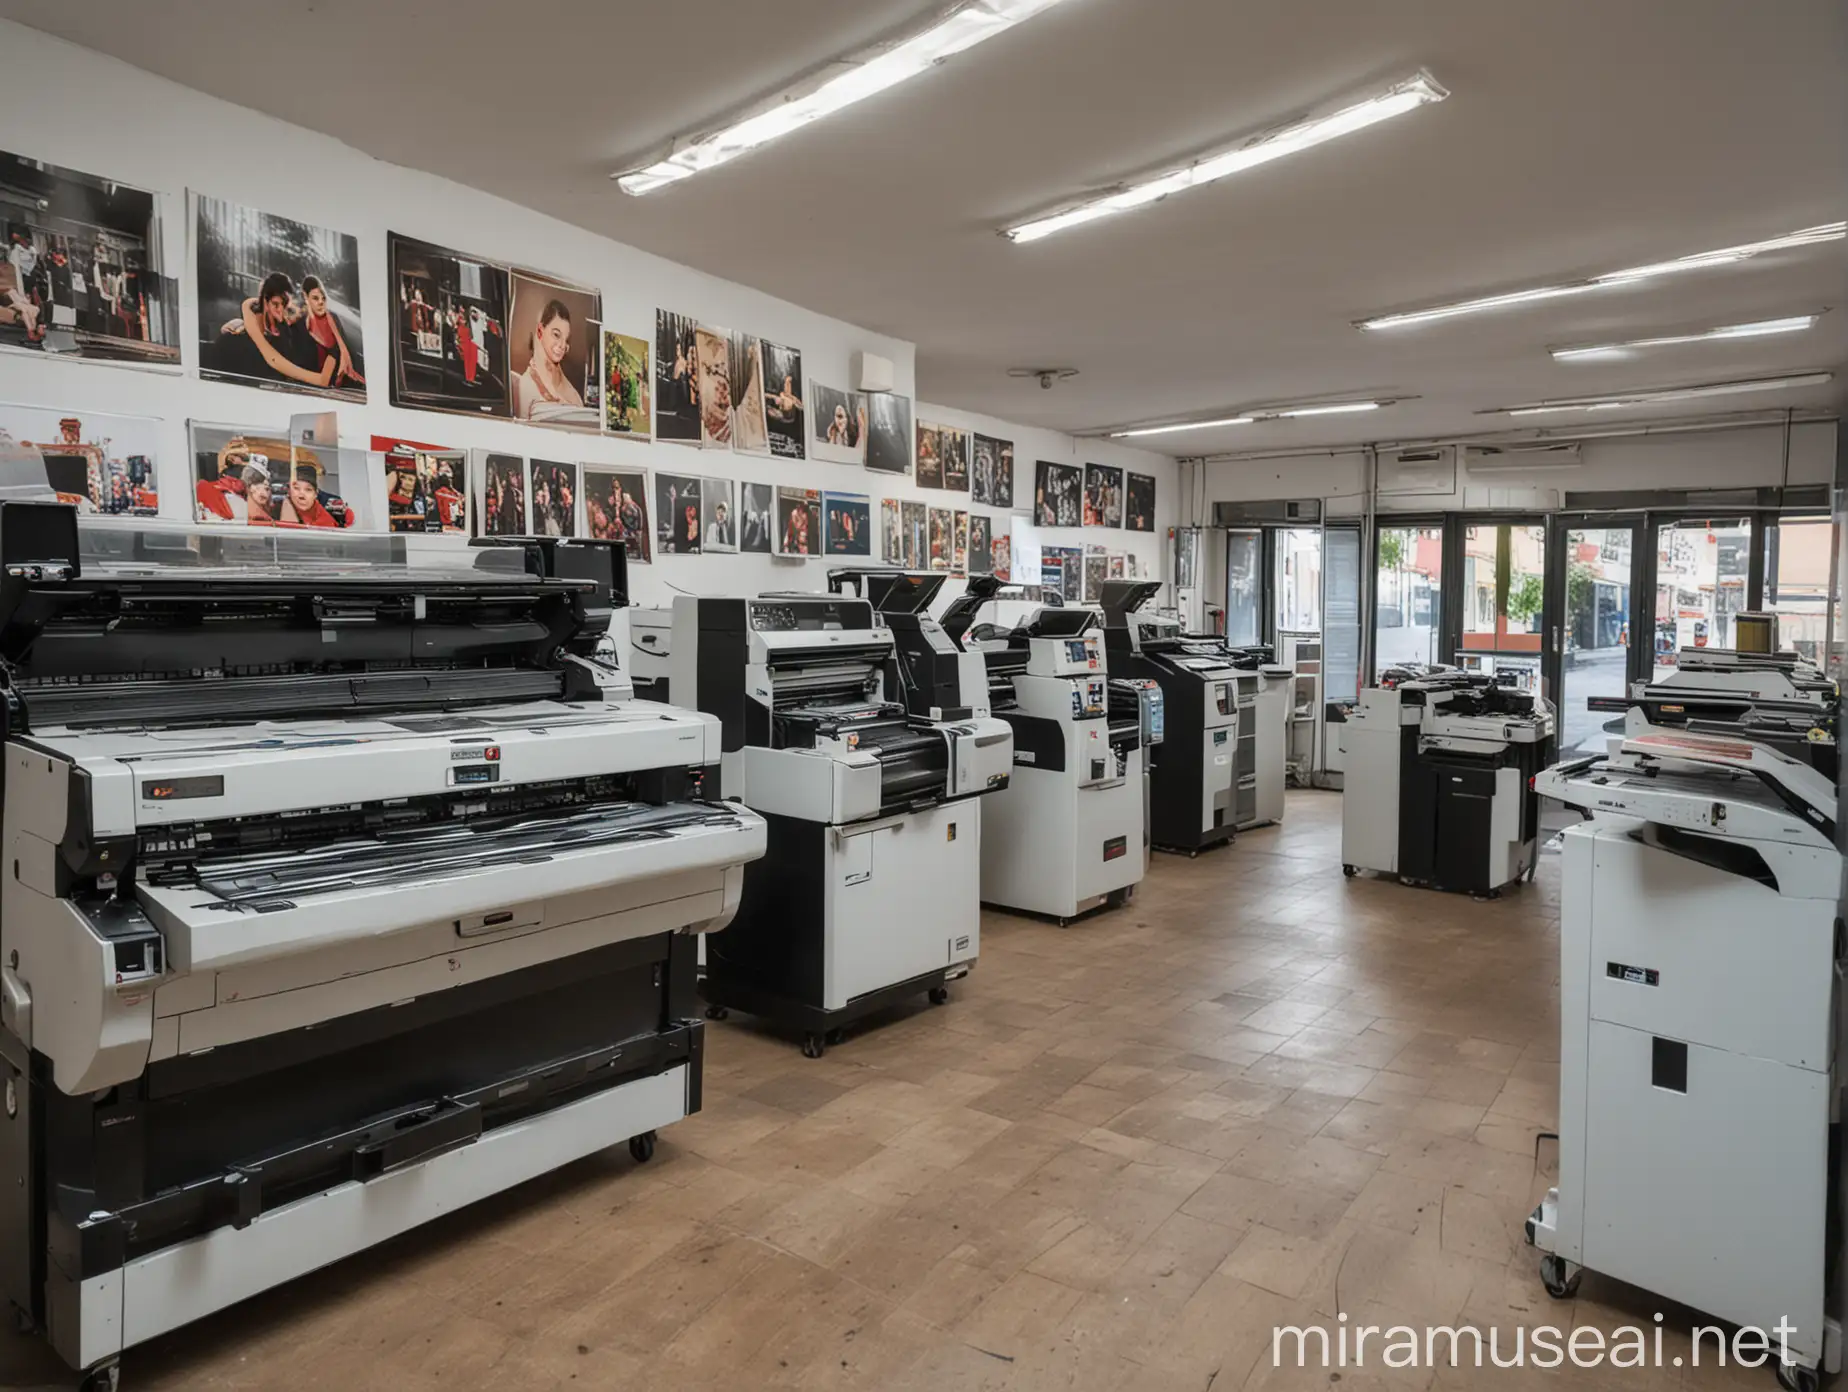 Modern Instant Photo Printing Machines in a Vibrant Shop Setting